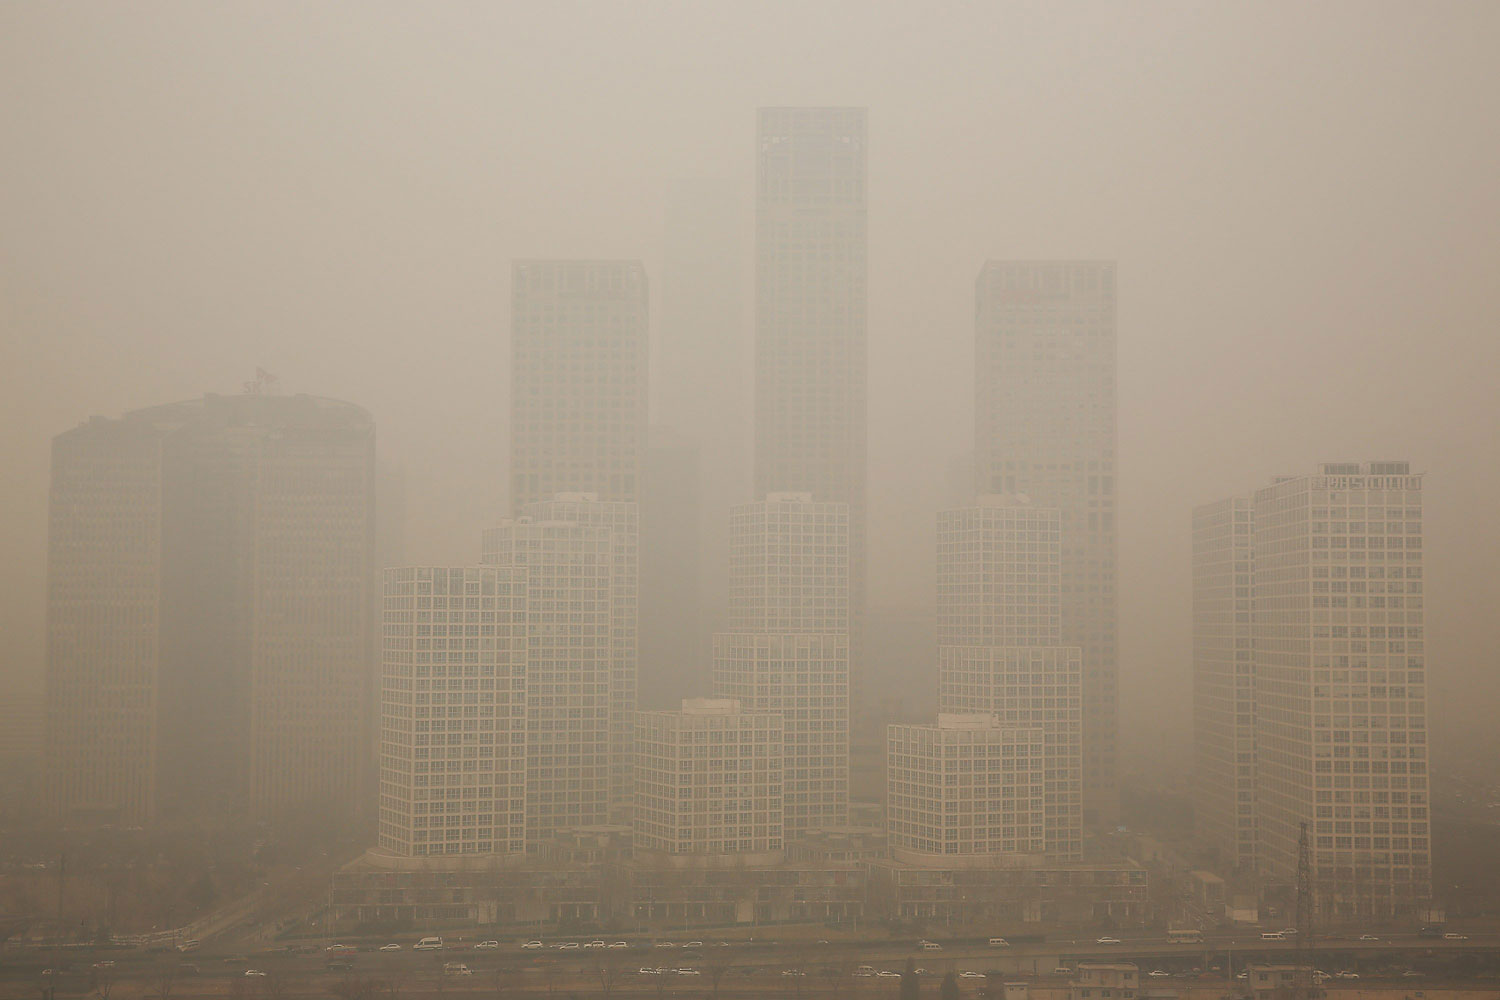 A general view of the pollution covered Beijing CBD on Feb. 25, 2014 in Beijing.